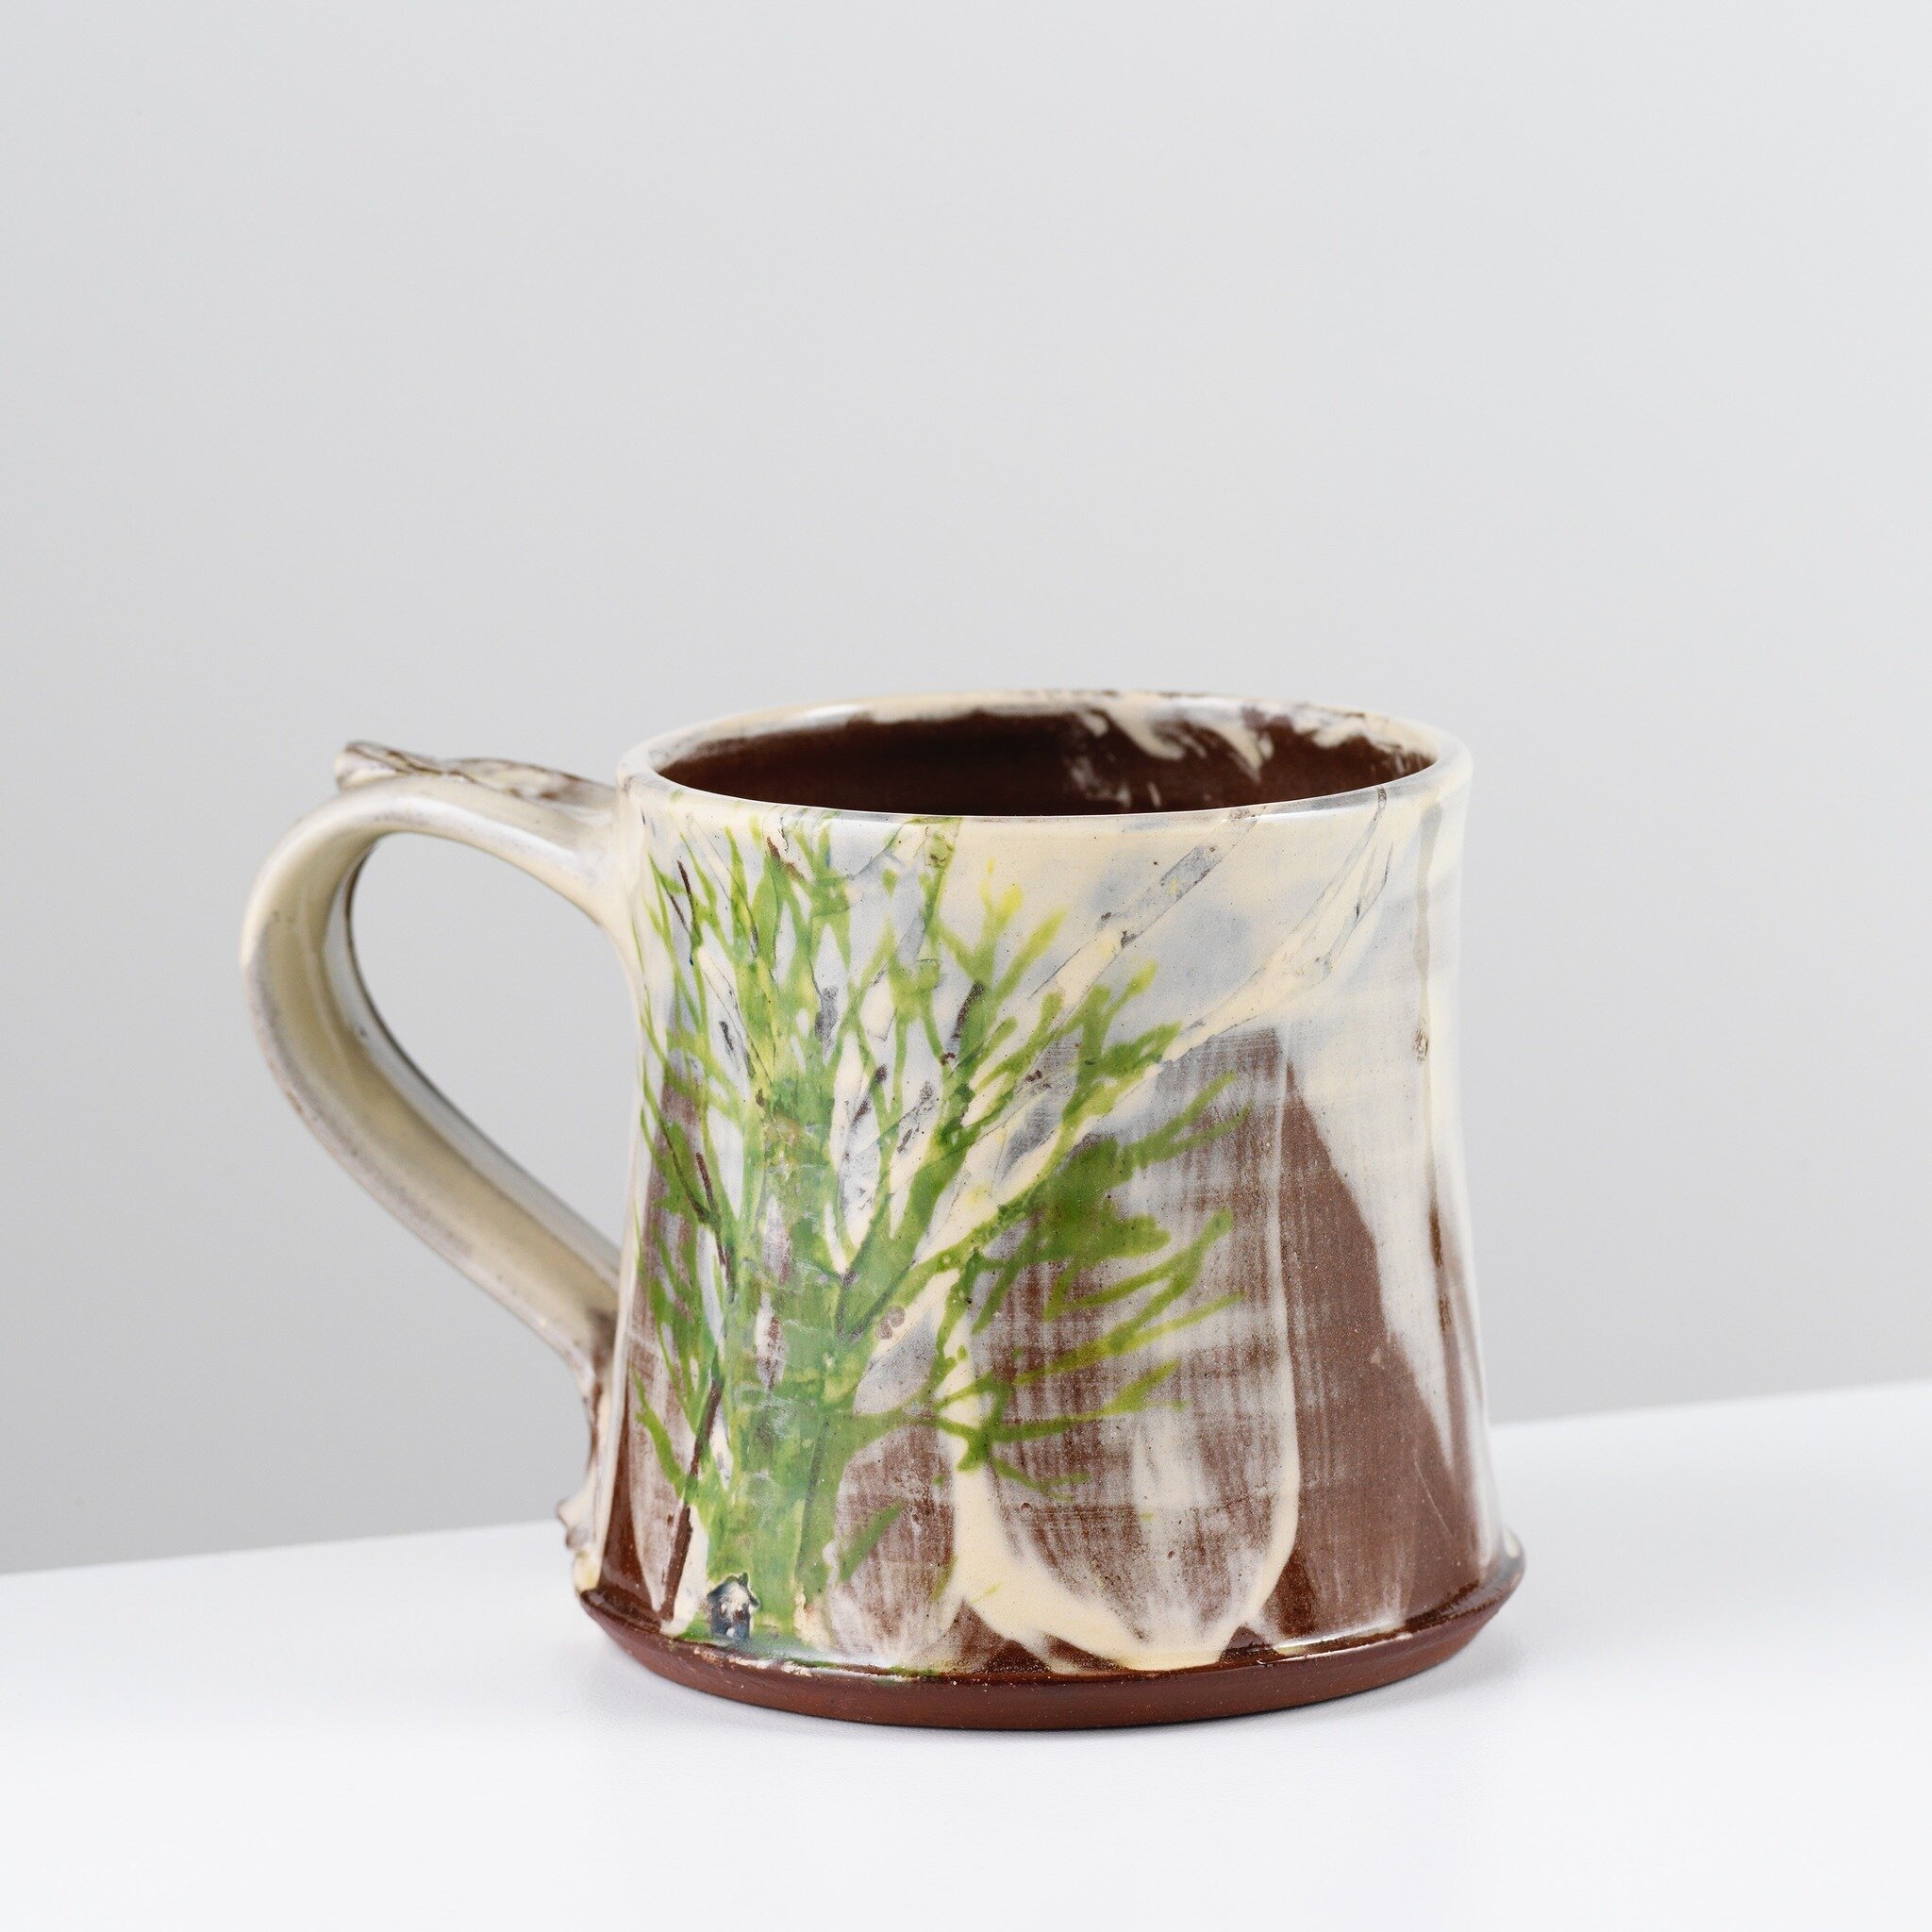 Happy #mugshotmonday 

This is one of my new &lsquo;home&rsquo; mugs.

Hope your week is starting well. I&rsquo;ve had a fun morning with my daughter and now i&rsquo;m in the studio and about to get loading my bisque kiln&hellip;

Photo by @shannonto